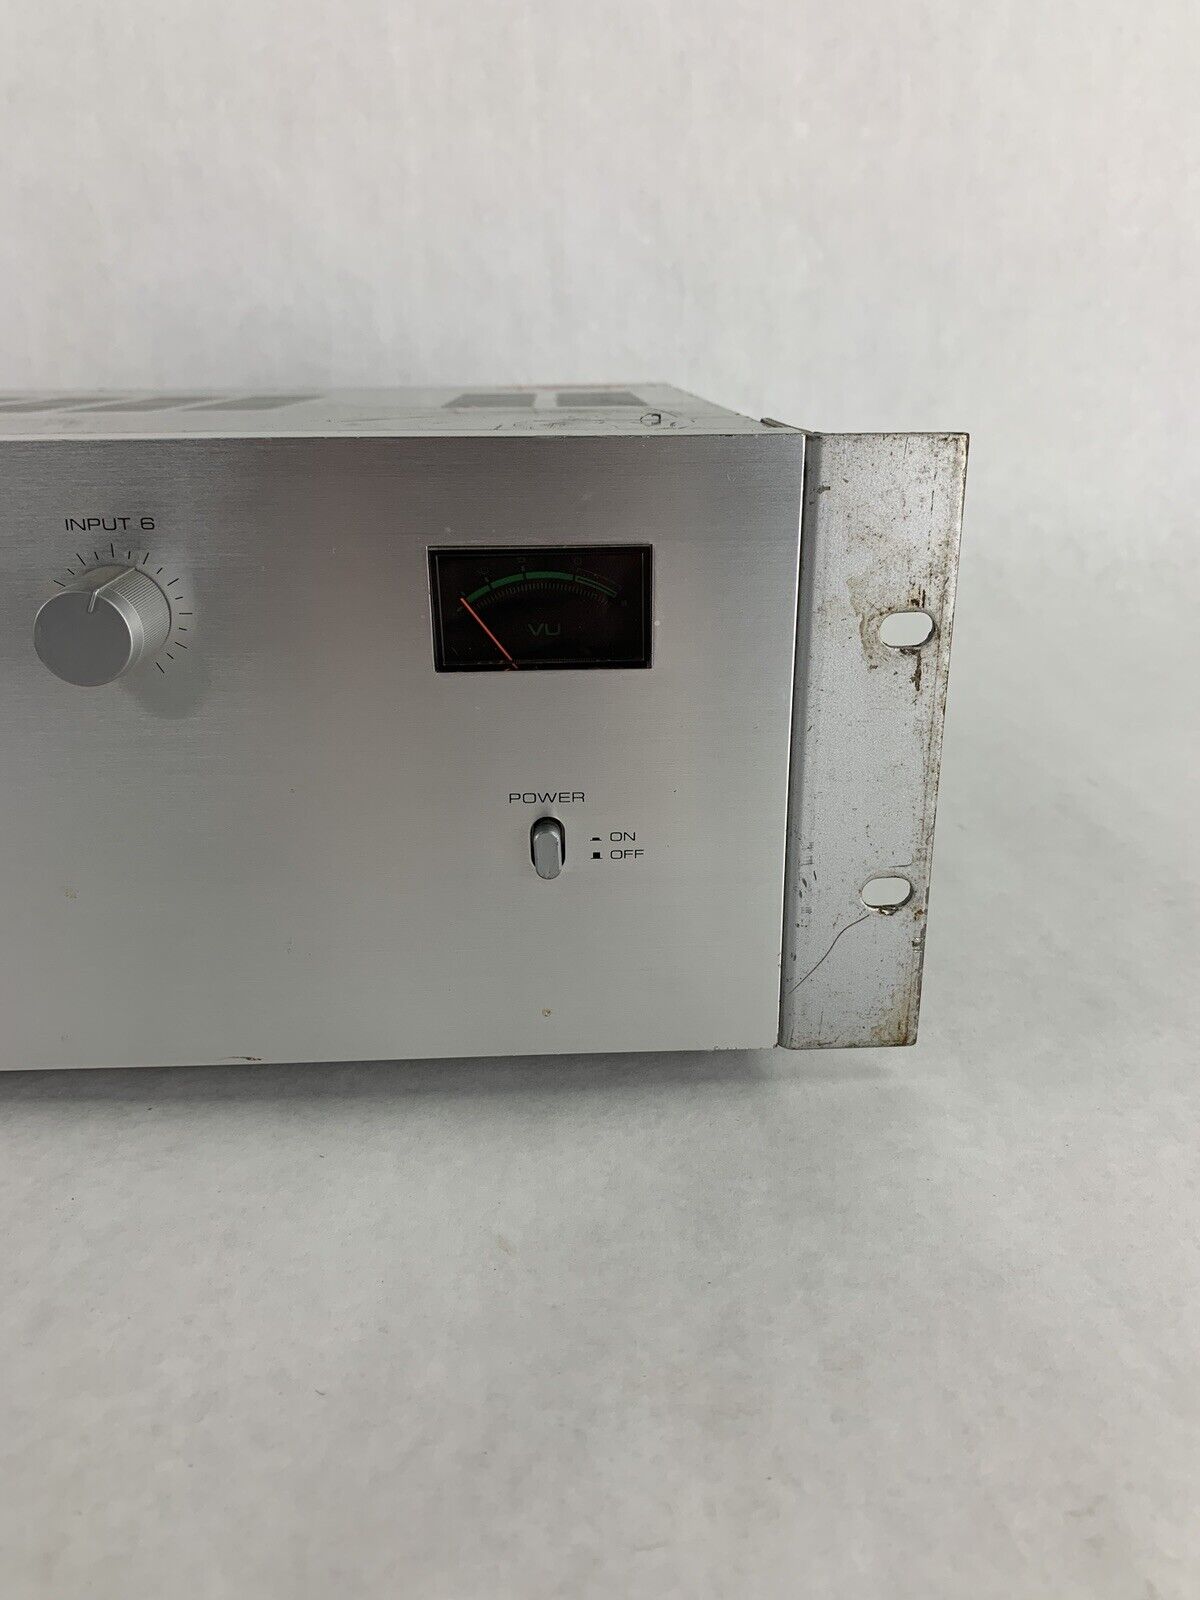 TOA A-912A 900 Series Mixer/Amplifier Missing Modular Cards Tested